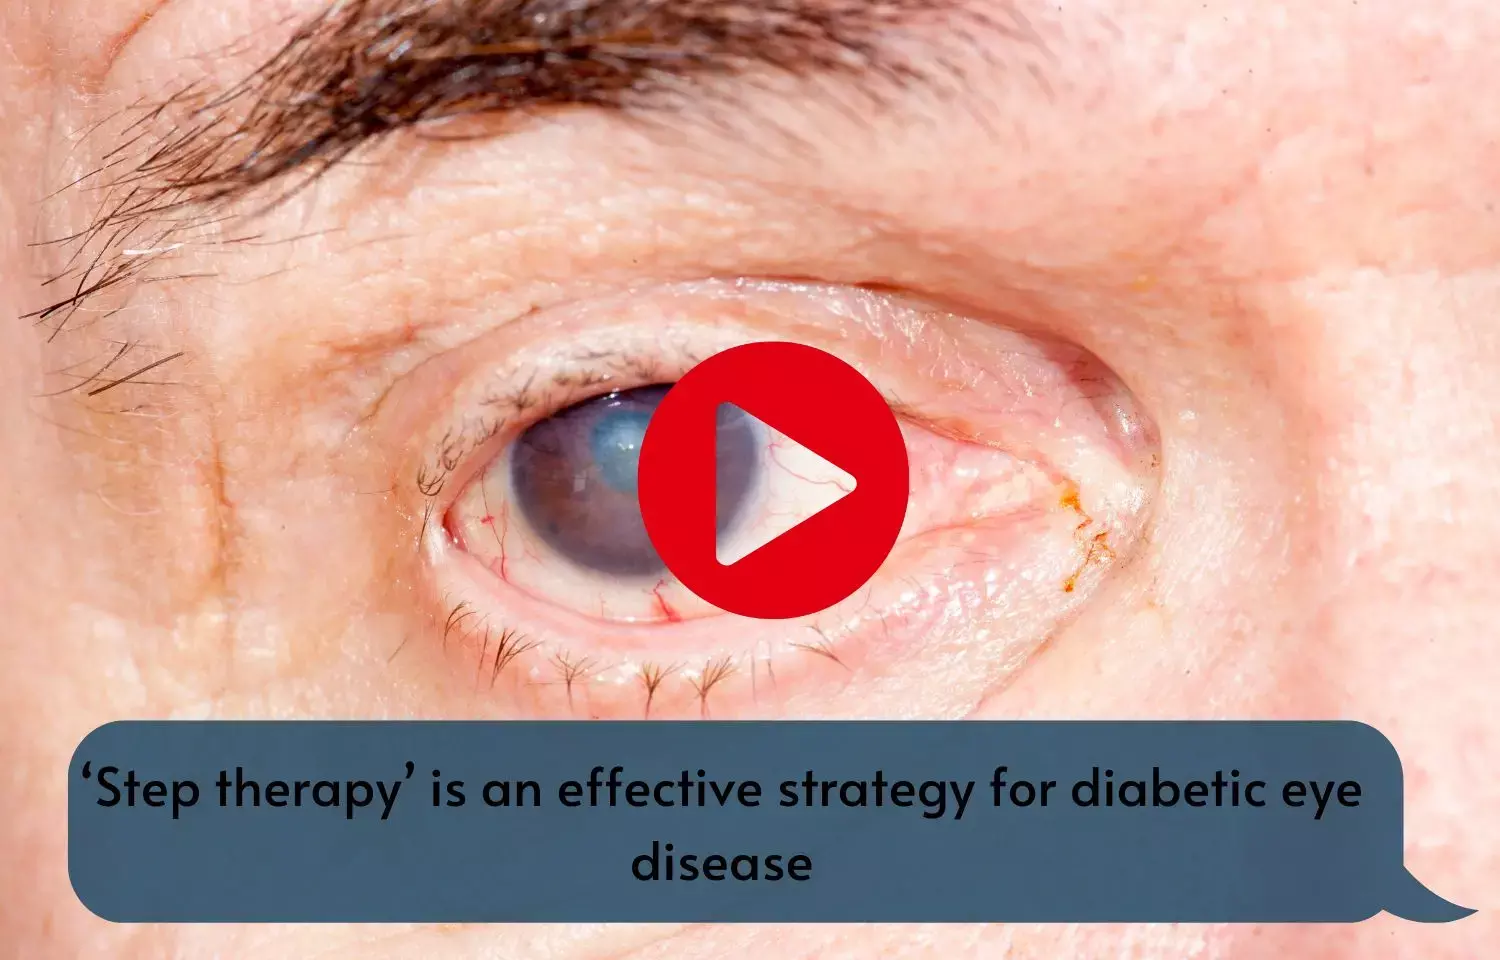 Step therapy an effective strategy for diabetic eye disease